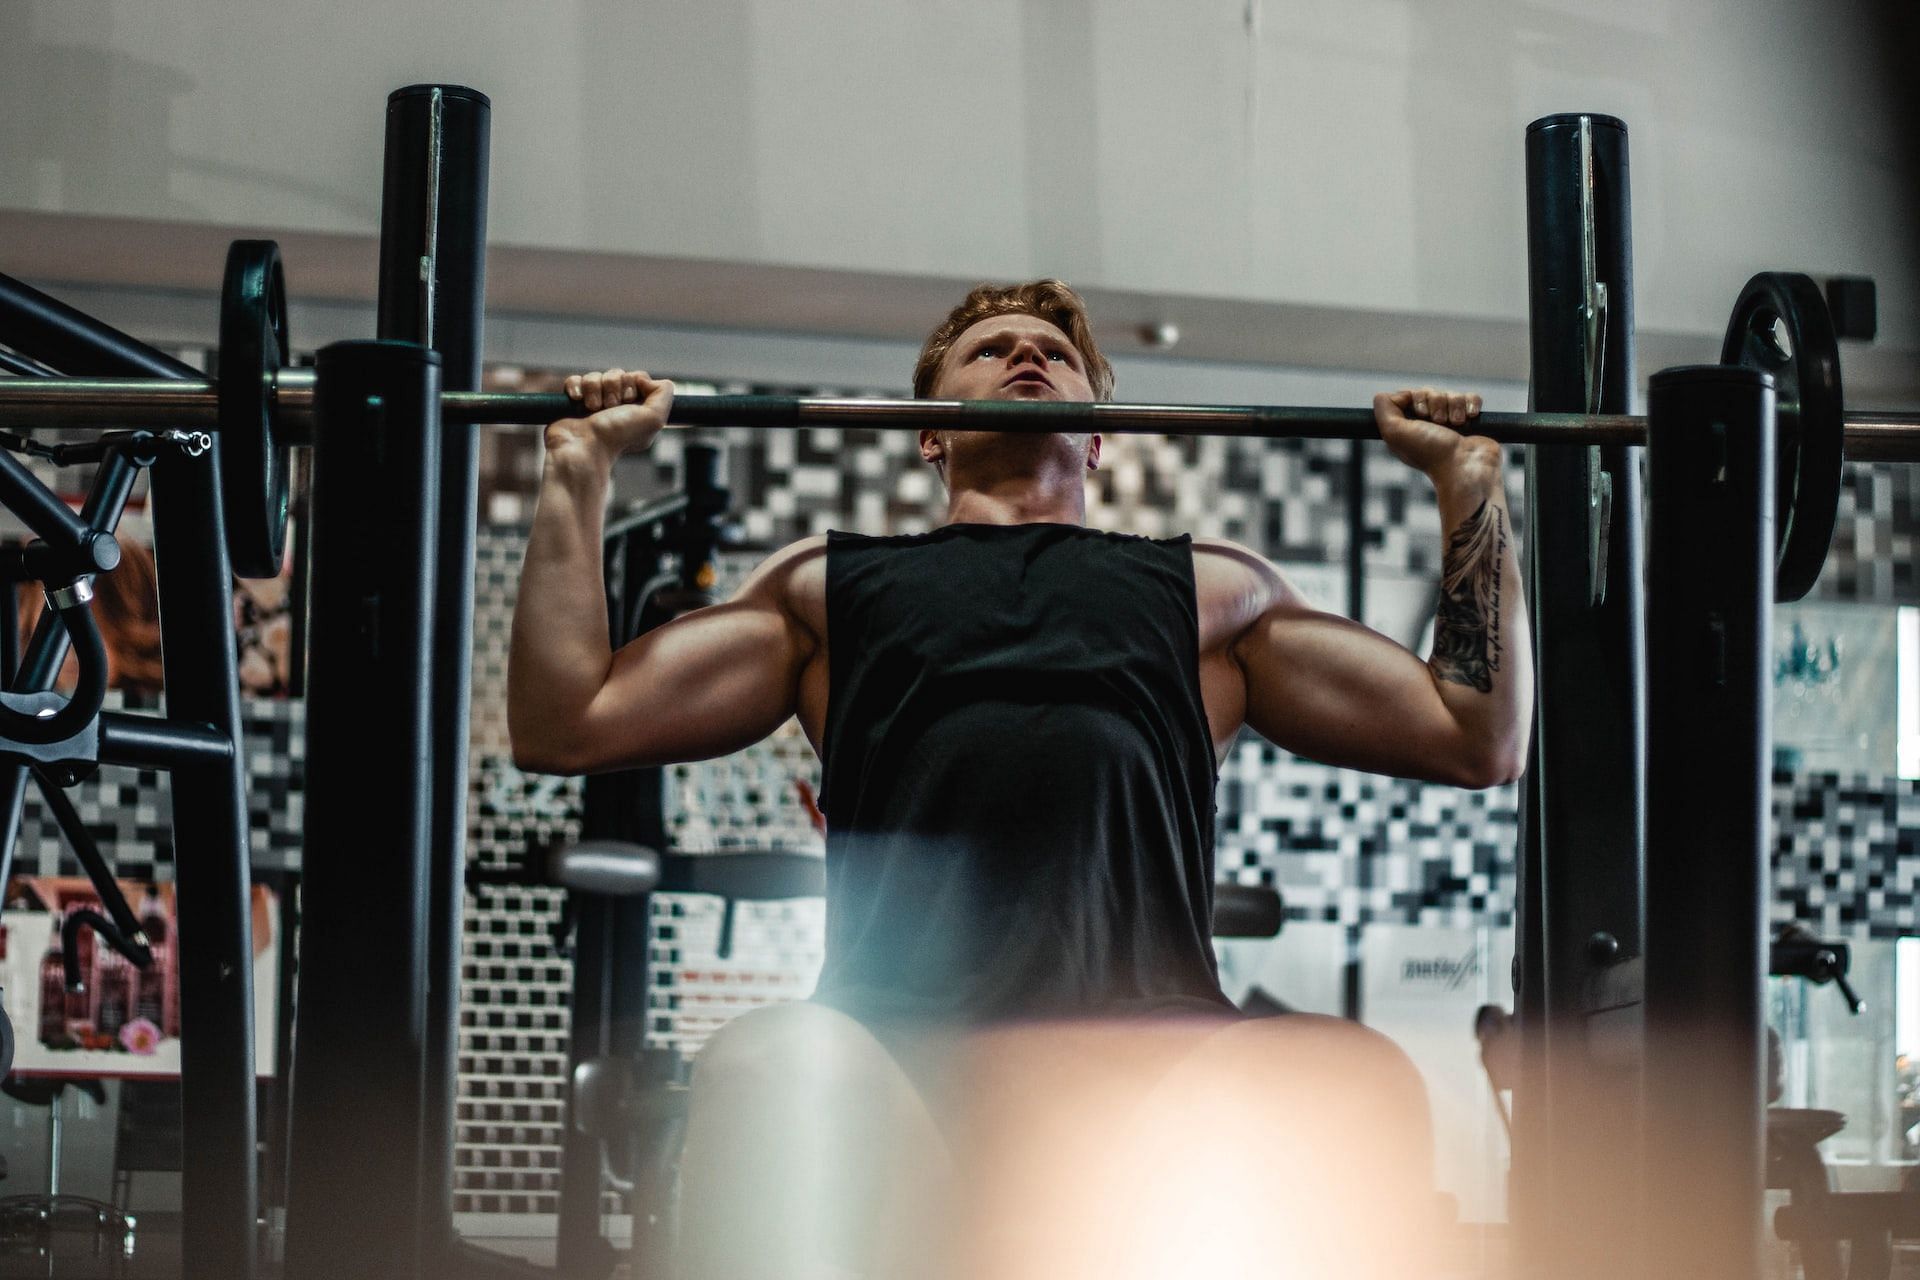 Guide to chest and shoulder execises for mass and growth. (Photo by Arthur Edelmans on Unsplash)